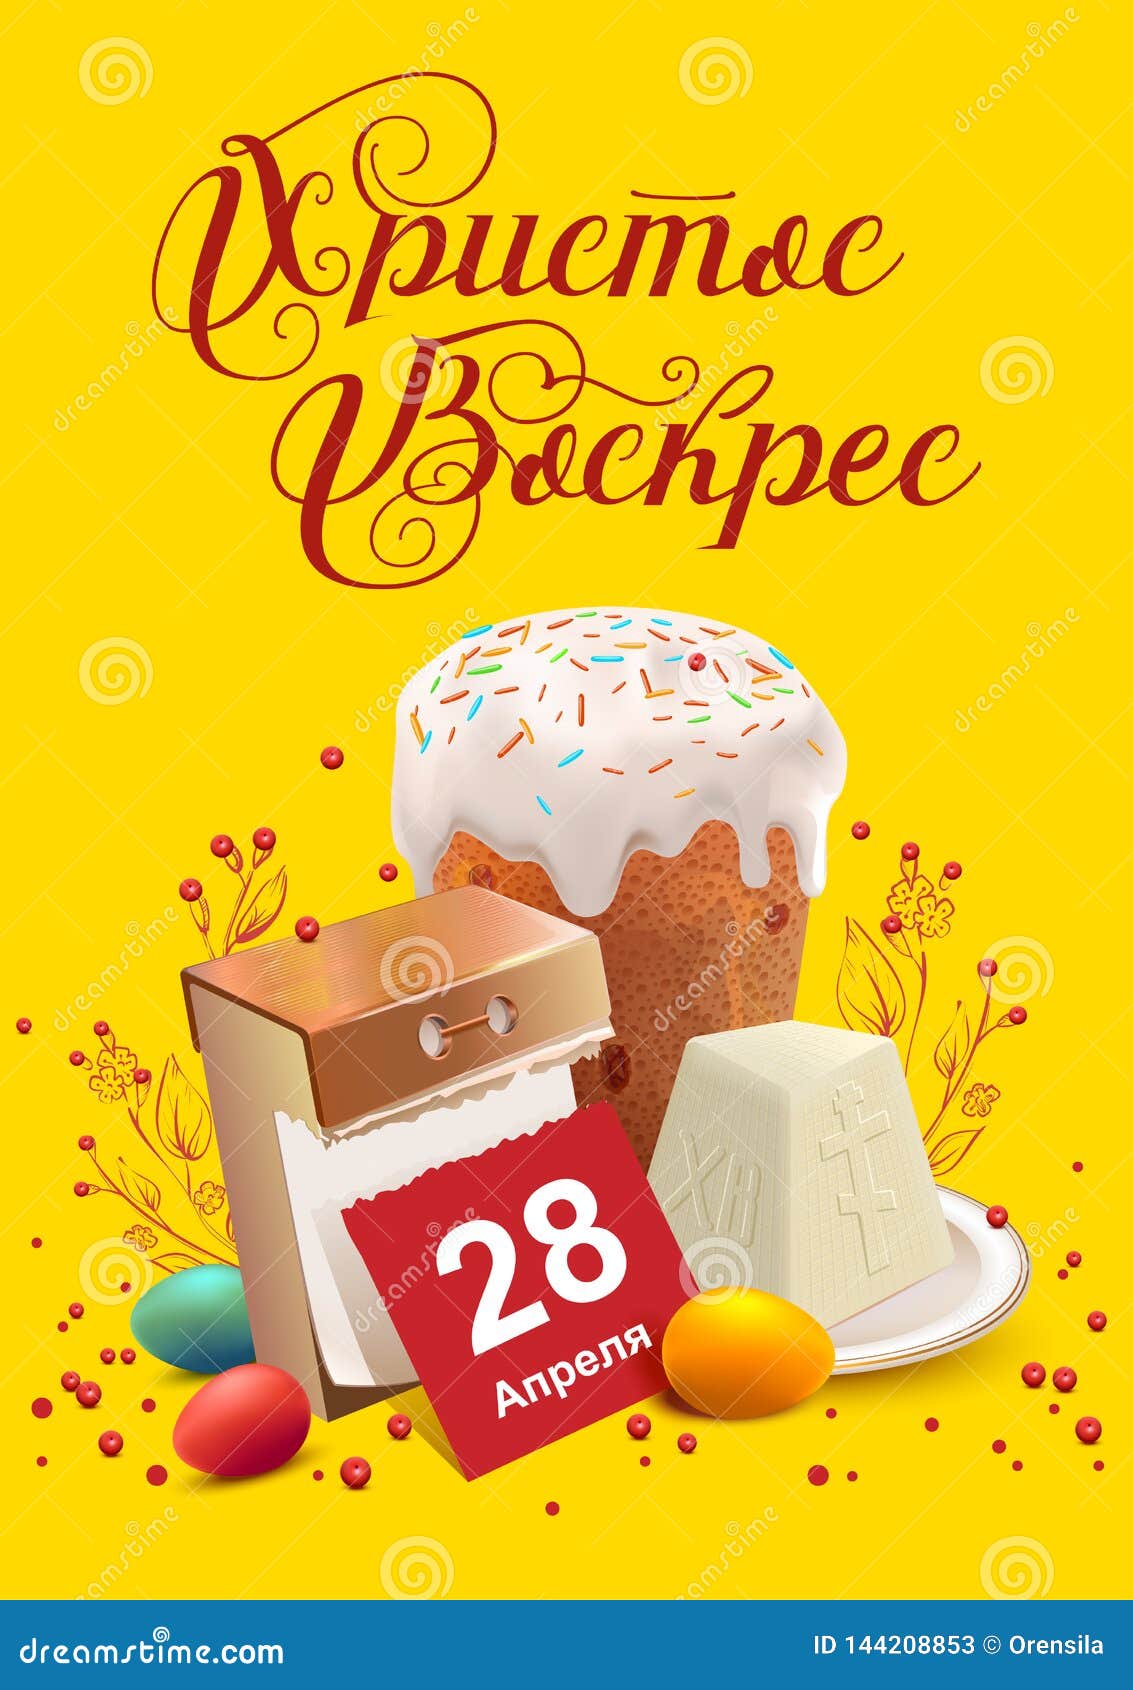 April 28, 2019 Russian Orthodox Easter. Greeting Card Calendar, Easter